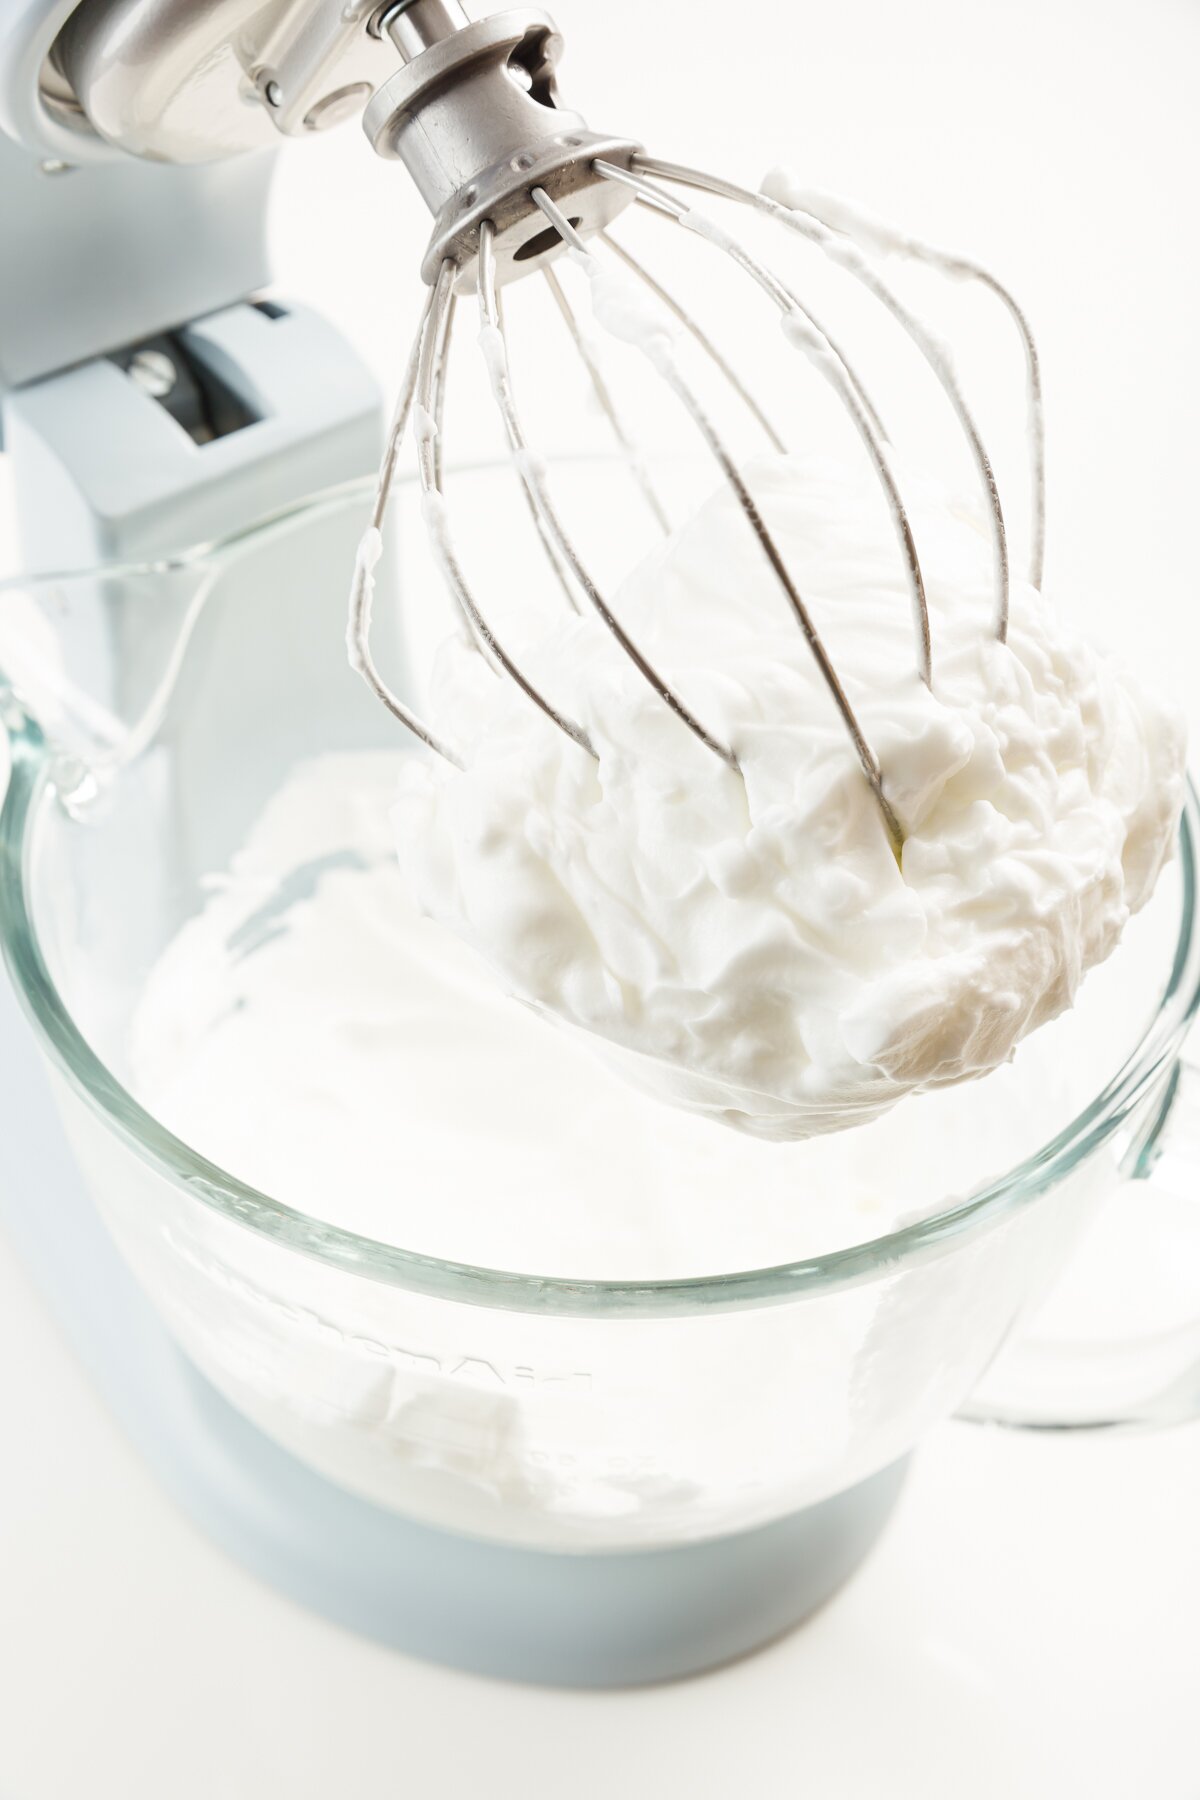 looking at a mixer bowl with egg whites whipped with cream of tartar to form stiff peaks